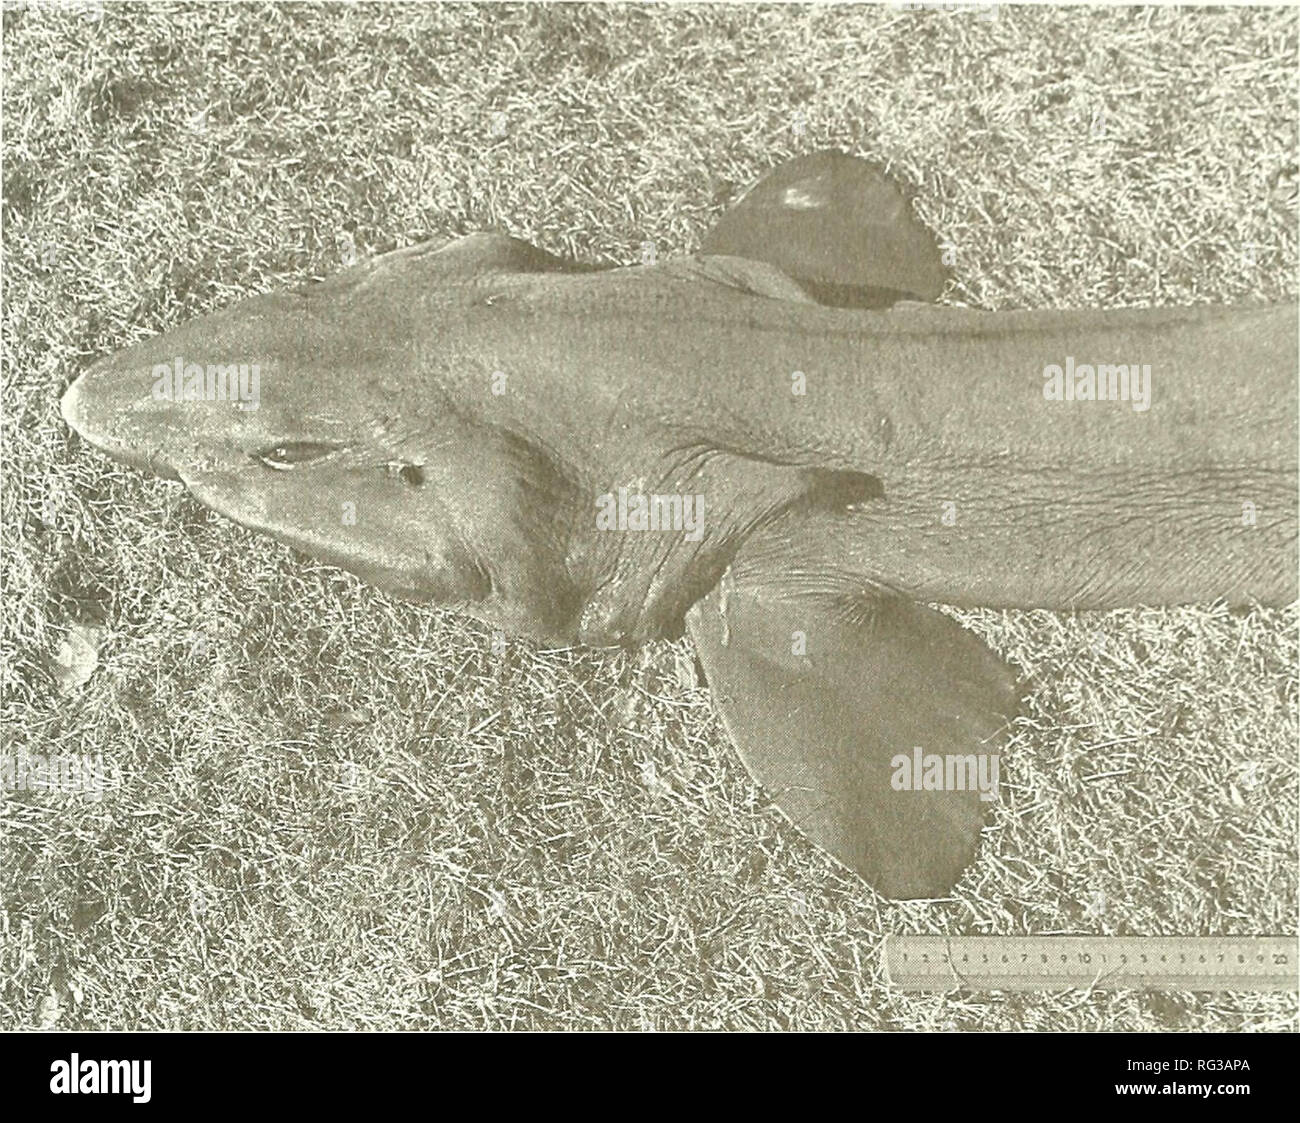 . The Canadian field-naturalist. 1999 Notes 515. Figure 2. Close-up of head of False Catshark, Pseudotriakis micwdoiu NSM12550, south- east of Sable Island, Nova Scotia. The body is a slate-grey colour with no evident markings. Literature reports state that the body is dark brown in some specimens. Fins are generally darker than the body although in this specimen the first dorsal fin is lighter. Maximum size in the litera- ture is 2.95 m total length for females and 2.7 m for males. The description agrees well with those in Bigelow and Schroeder (1948), Compagno (1984, 1988), and Yano and Musi Stock Photo